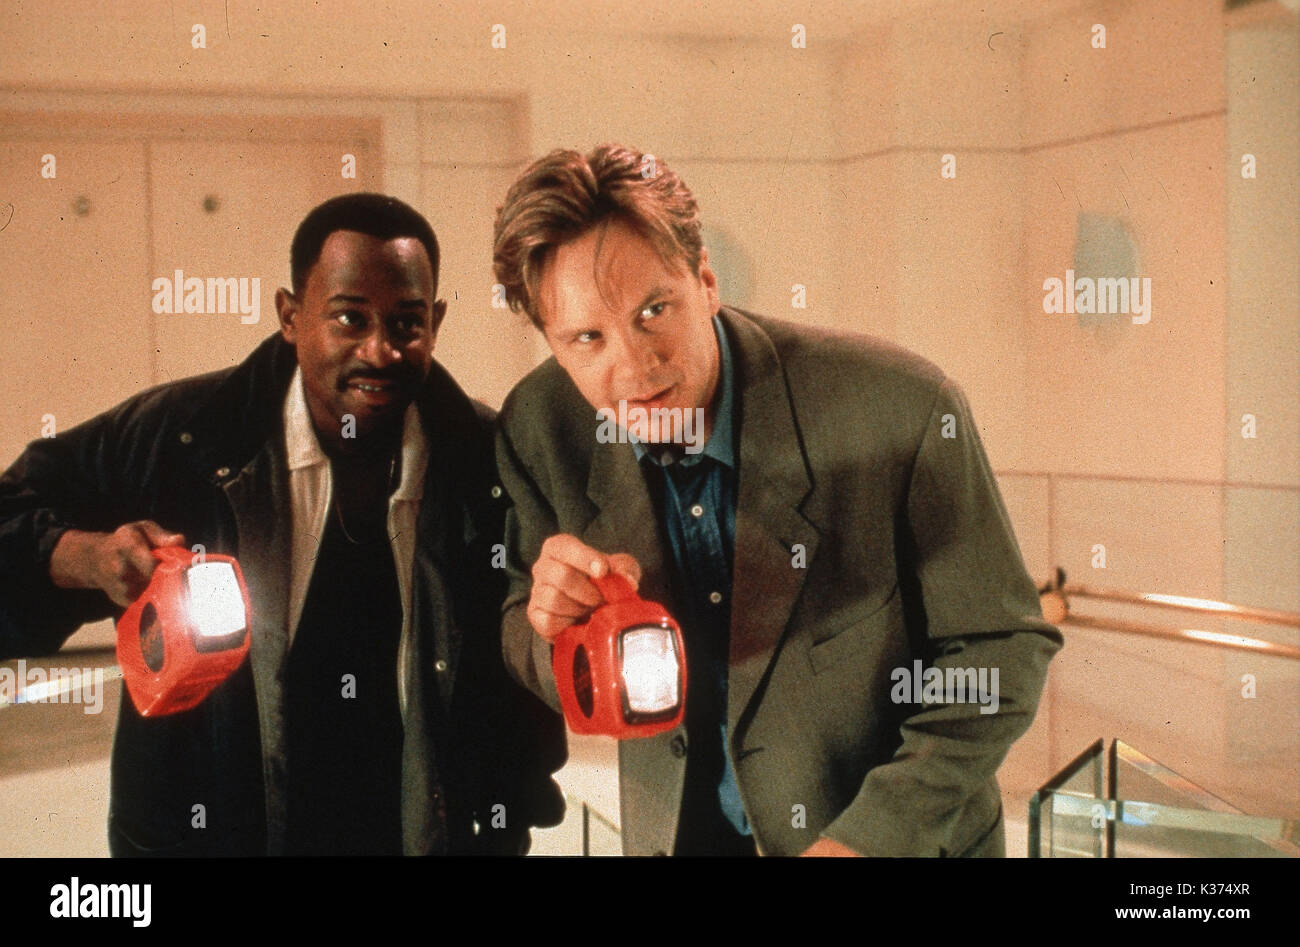 NOTHING TO LOSE MARTIN LAWRENCE AND TIM ROBBINS A TOUCHSTONE PICTURE     Date: 1997 Stock Photo